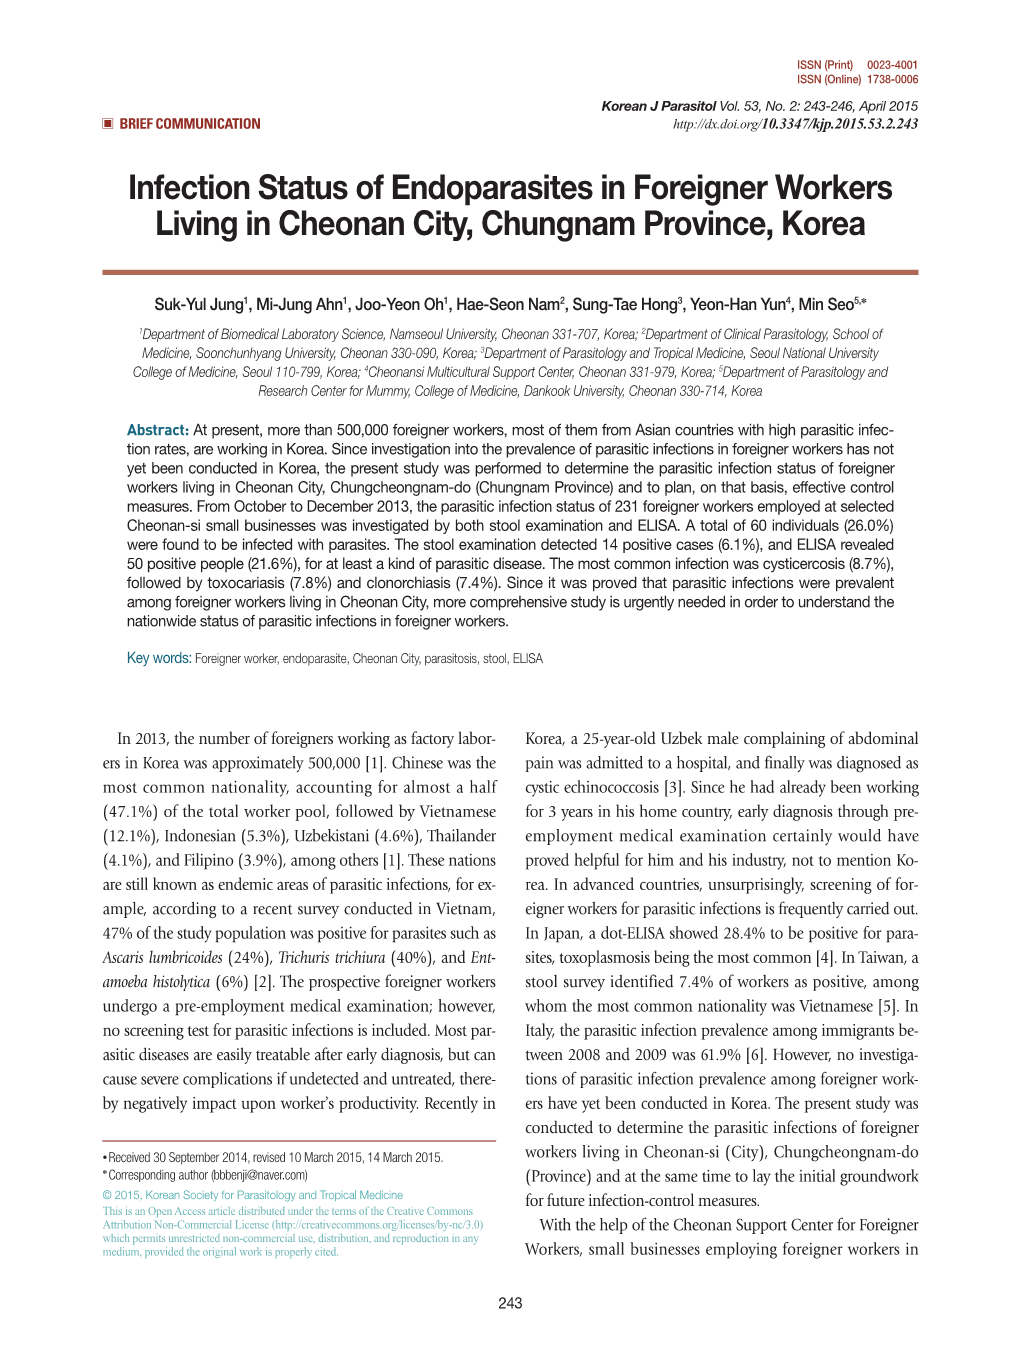 Infection Status of Endoparasites in Foreigner Workers Living in Cheonan City, Chungnam Province, Korea